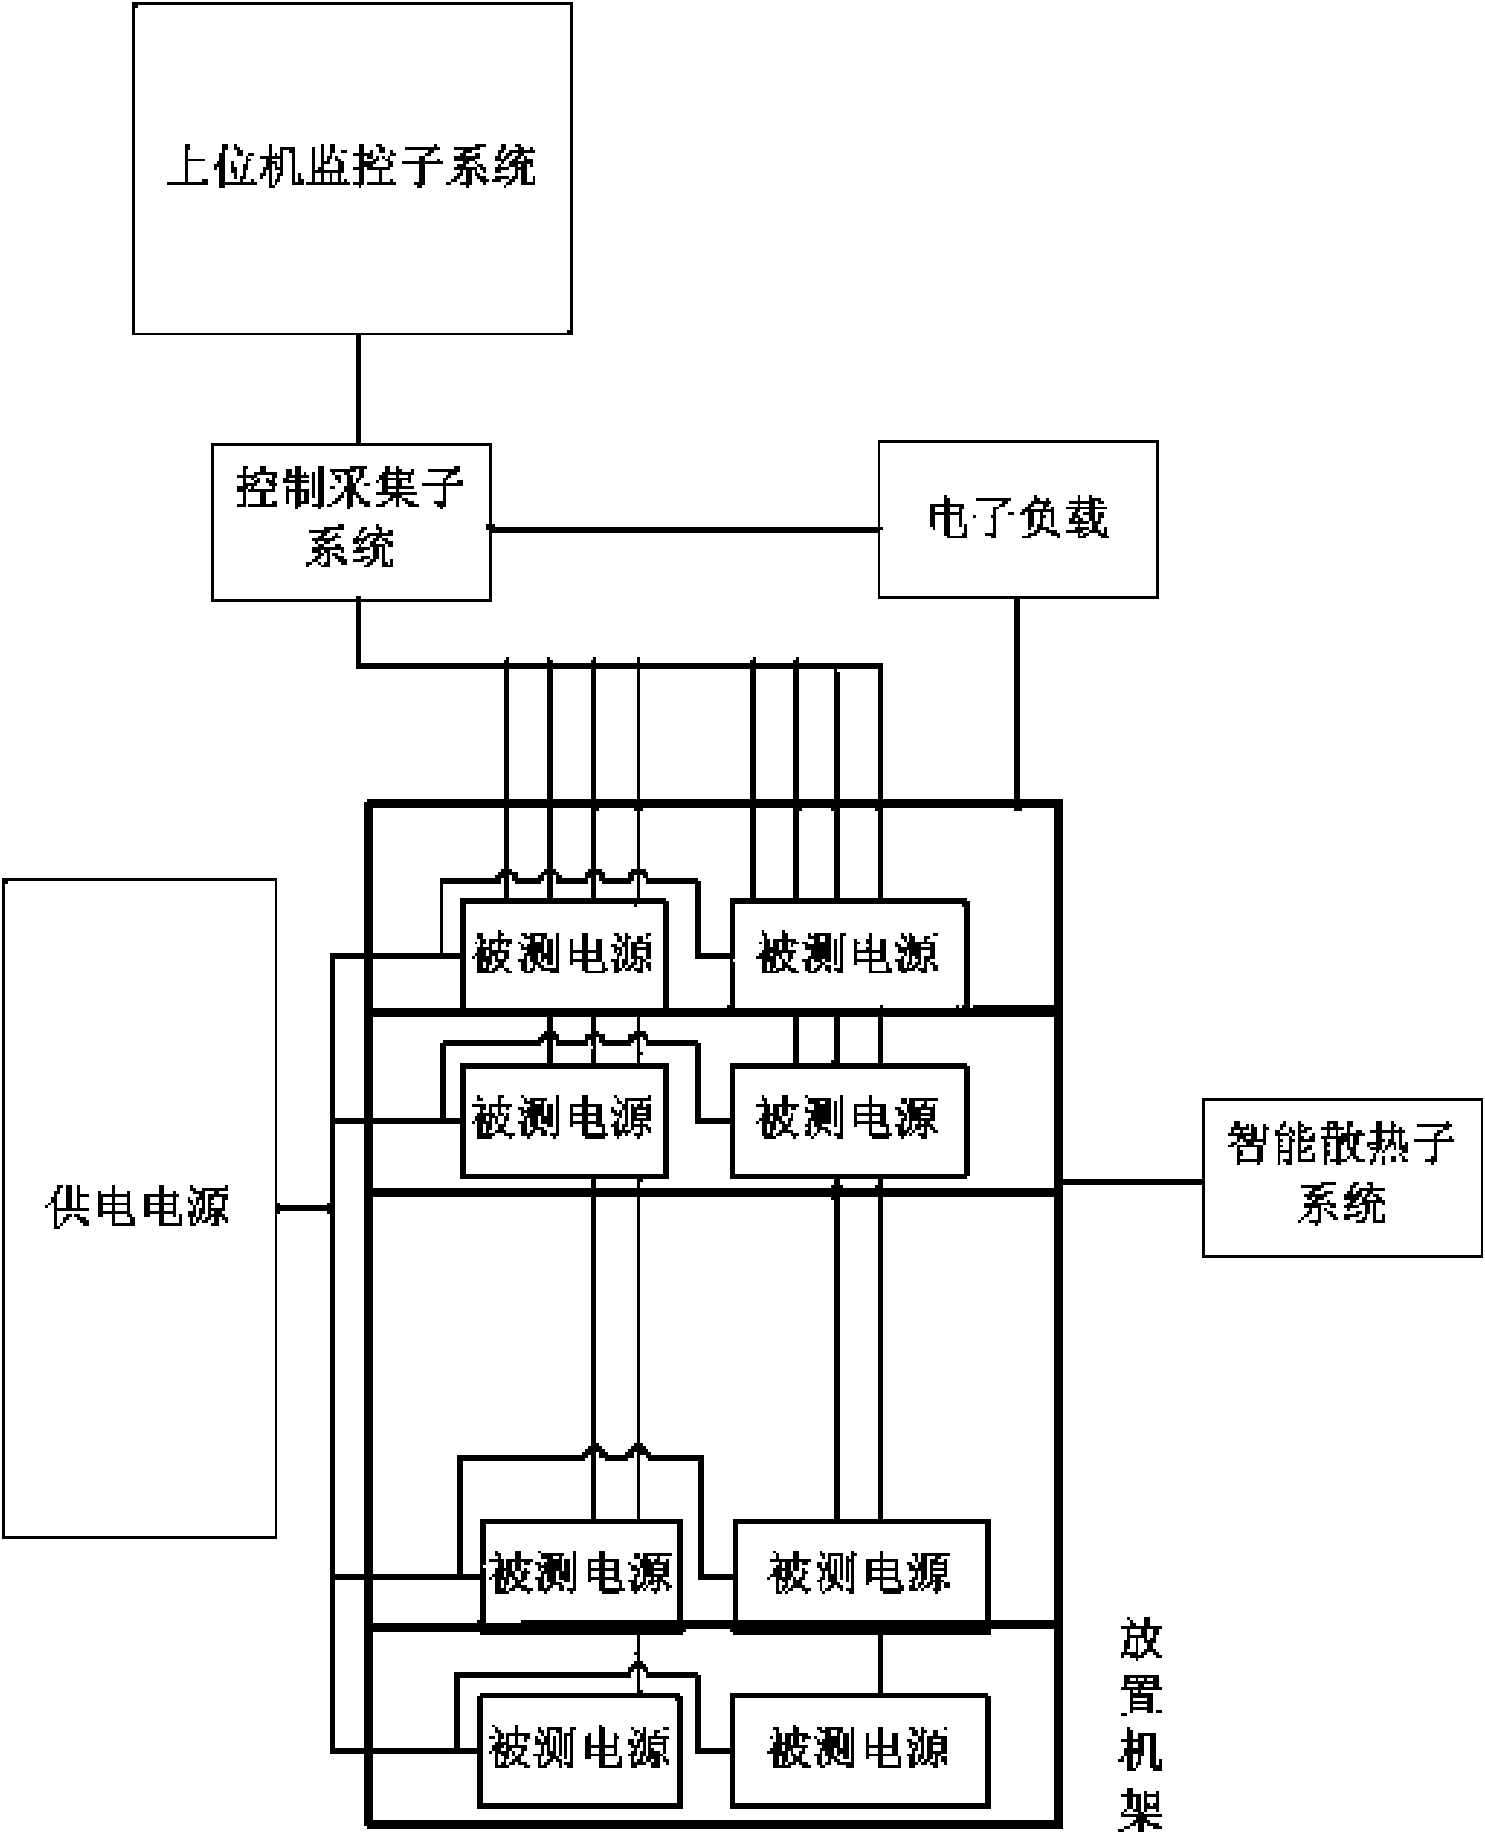 Universal power-aging testing system